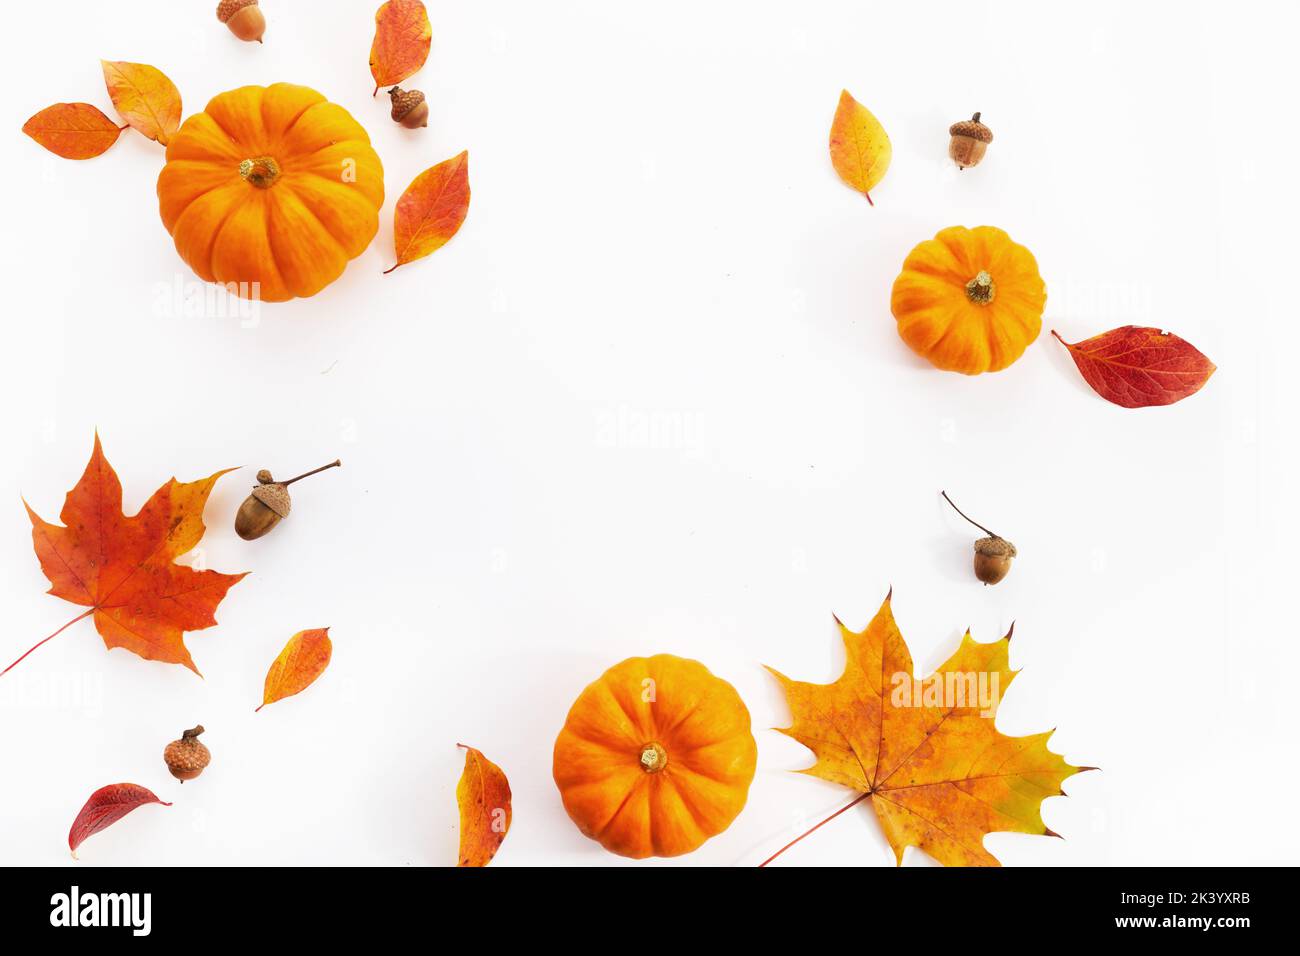 Pumpkins with fall leaves over white background. Top view. Stock Photo